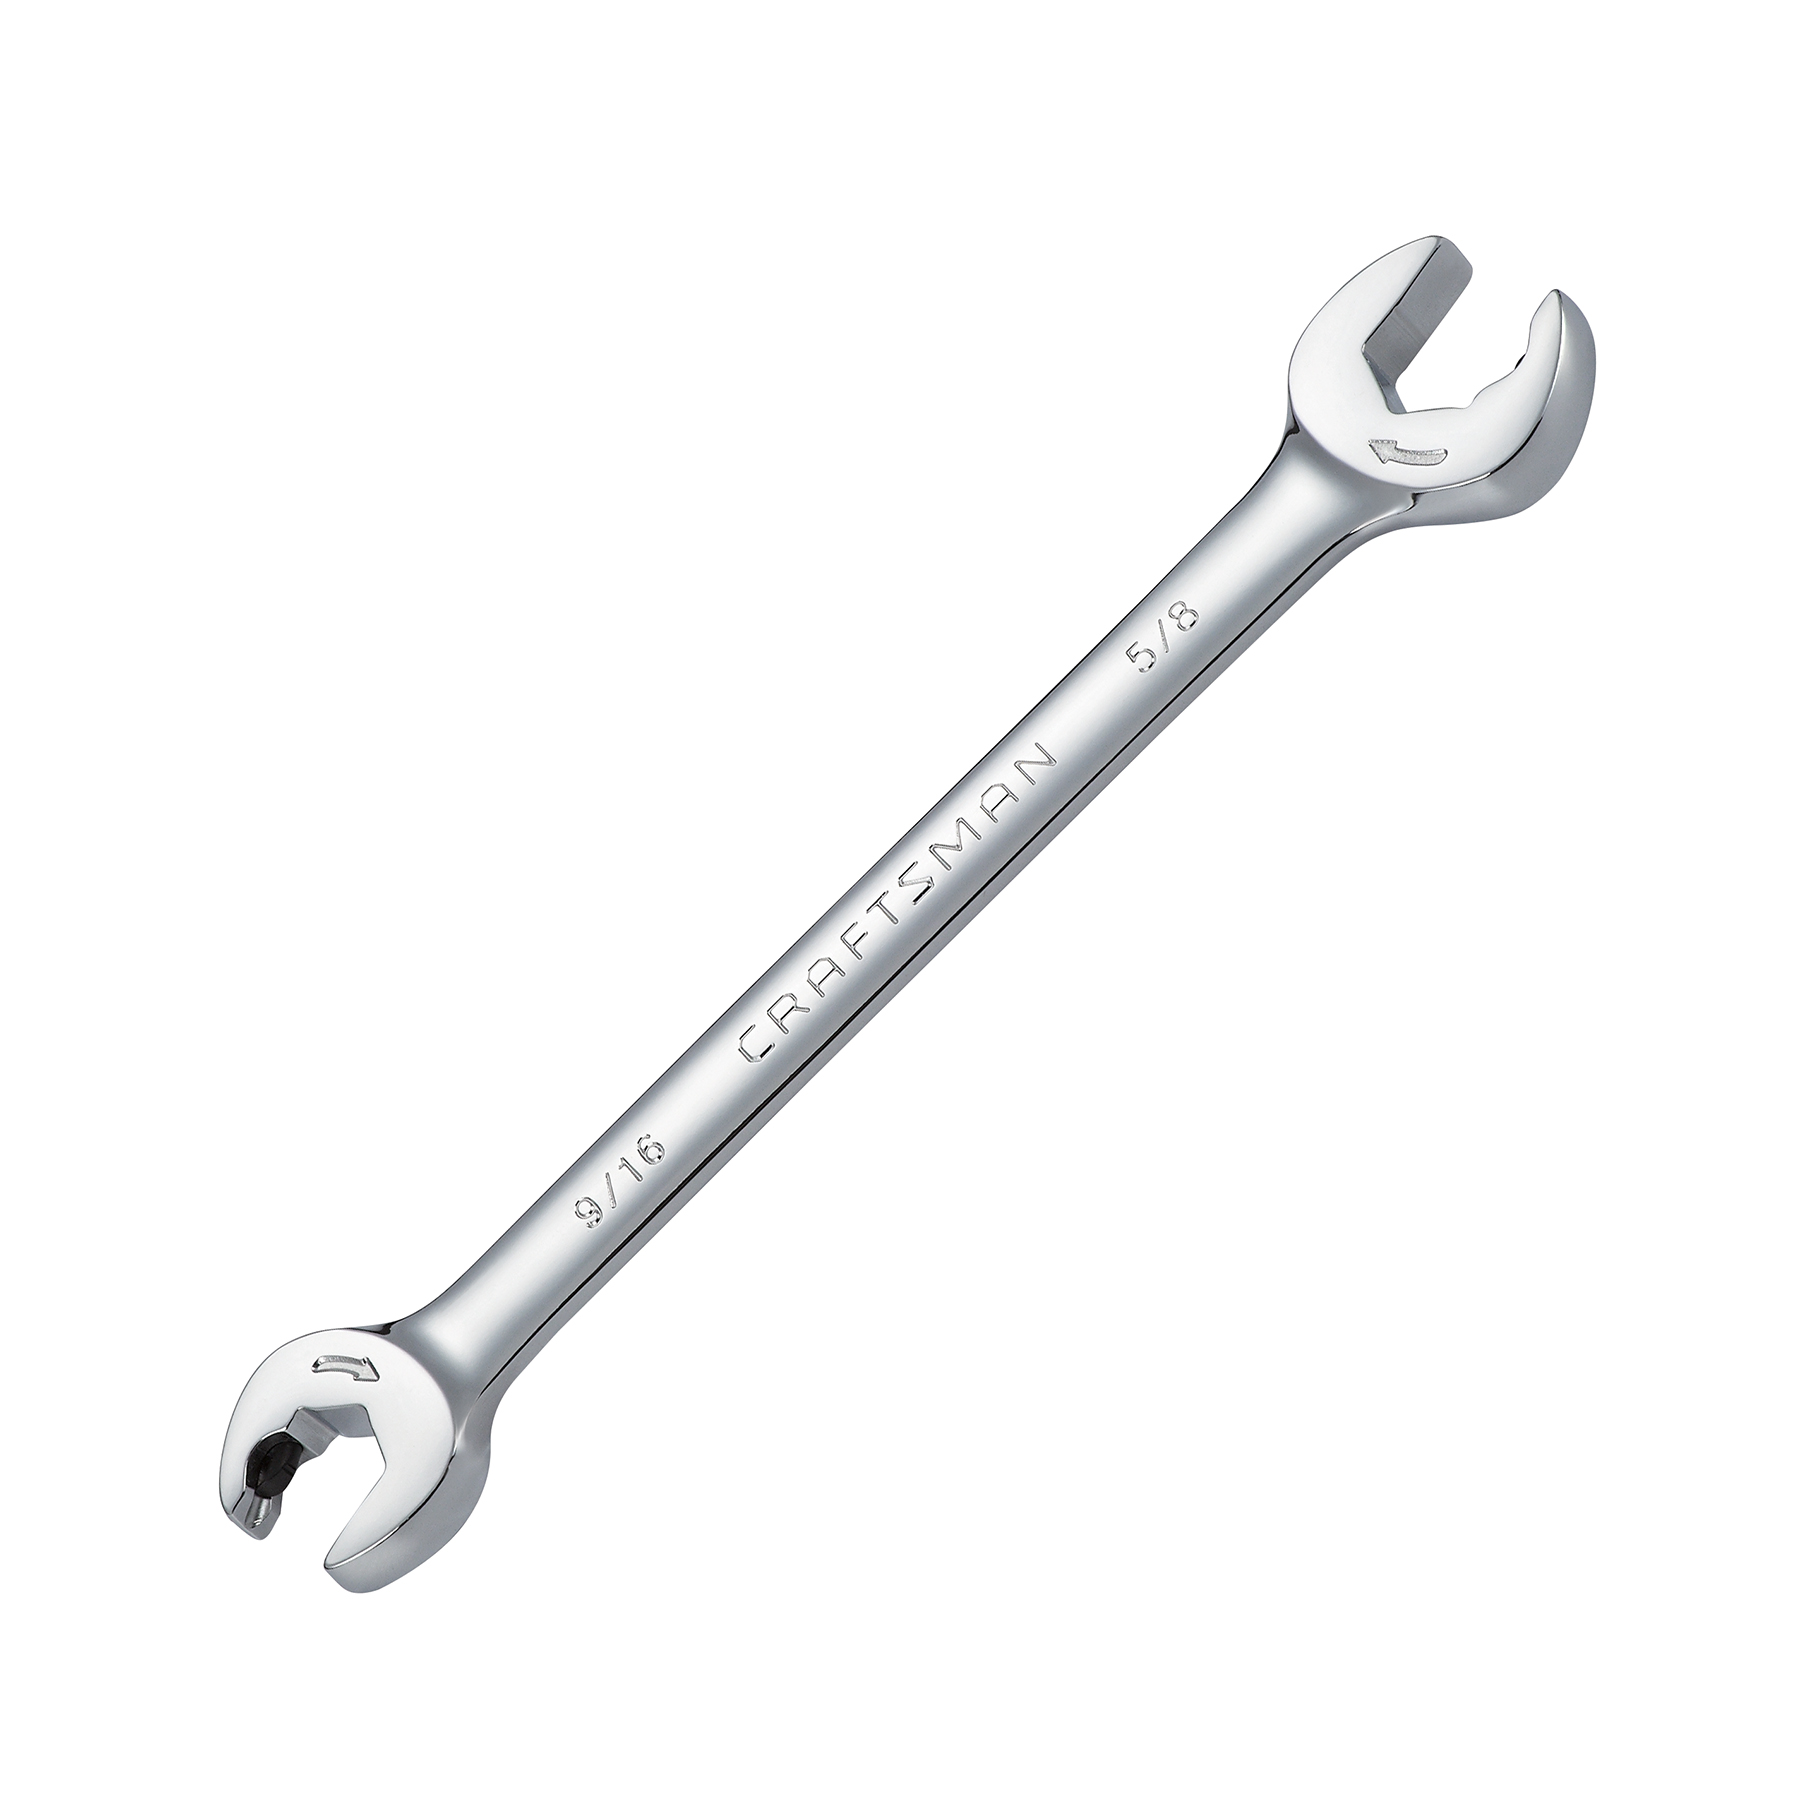 Craftsman 9/16 x 5/8 Inch Open End Ratcheting Wrench